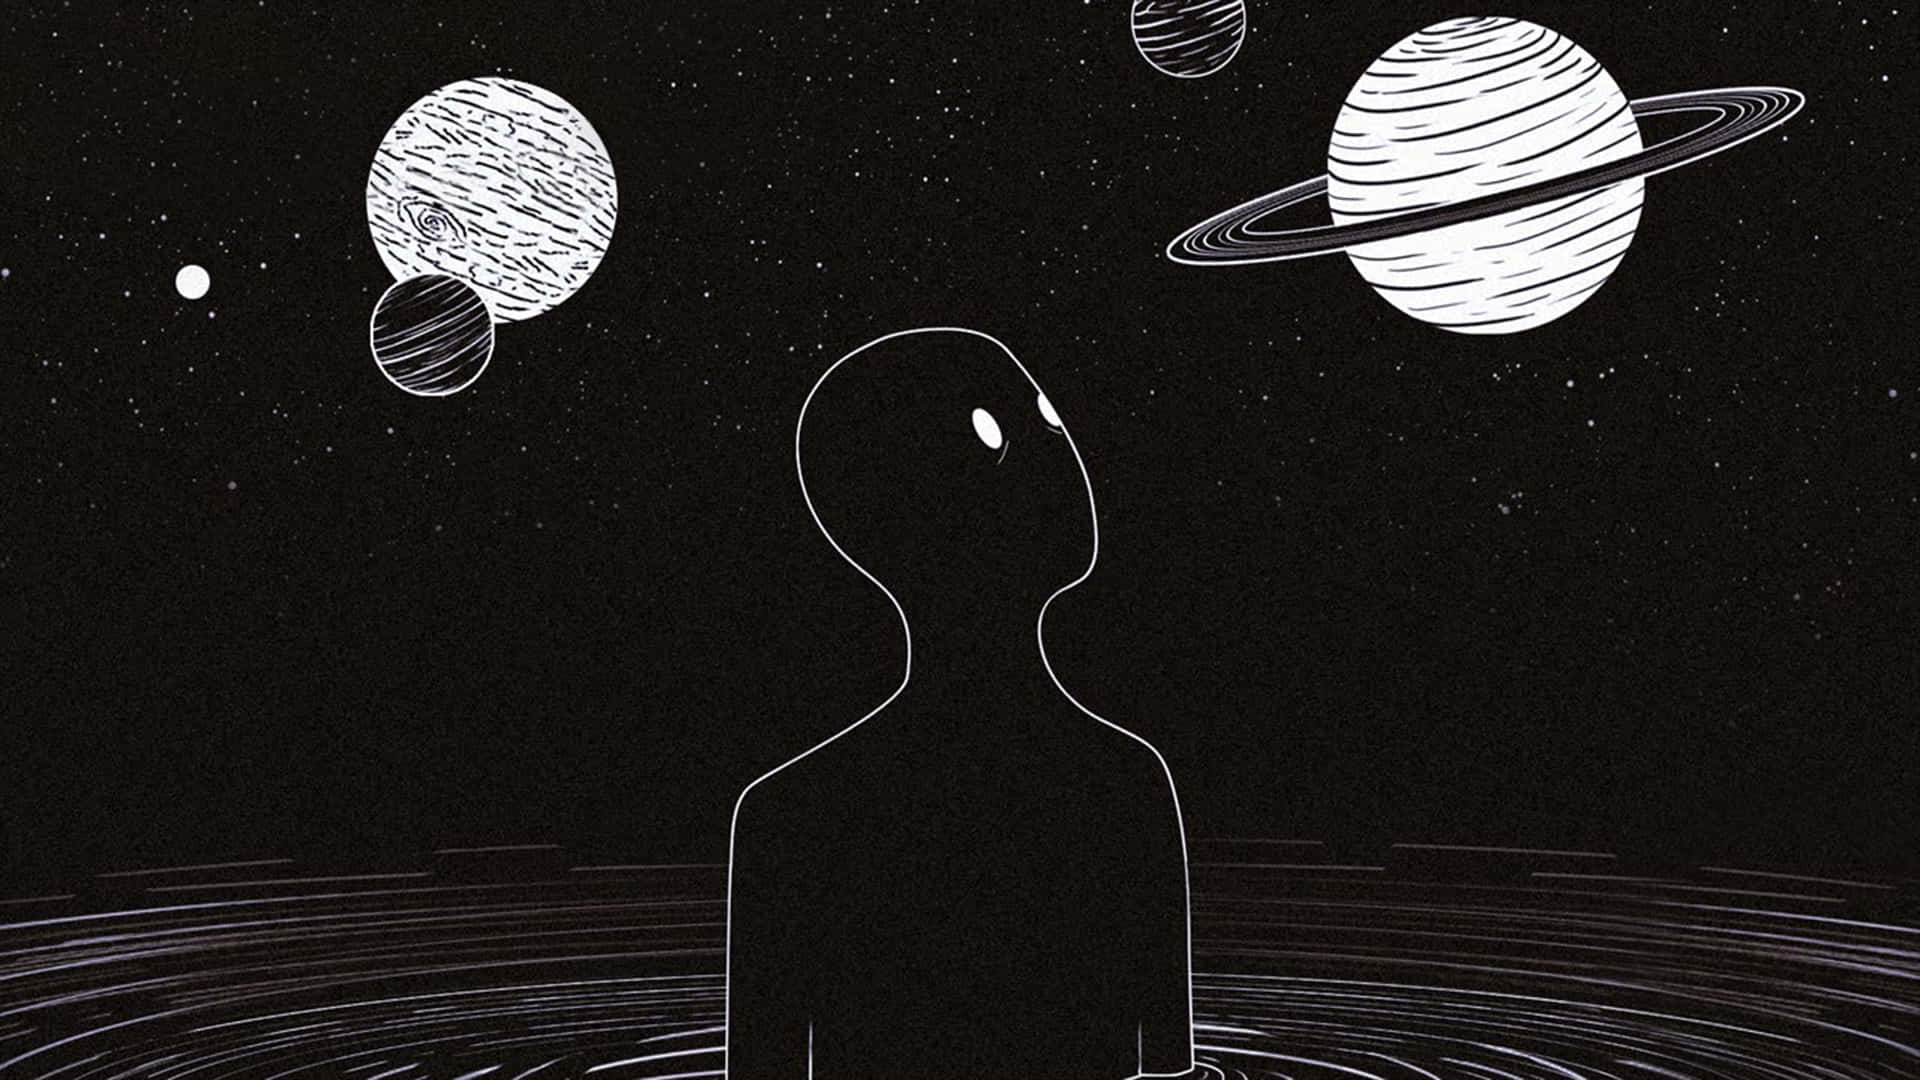 A black and white illustration of a person looking up at the night sky - Calming